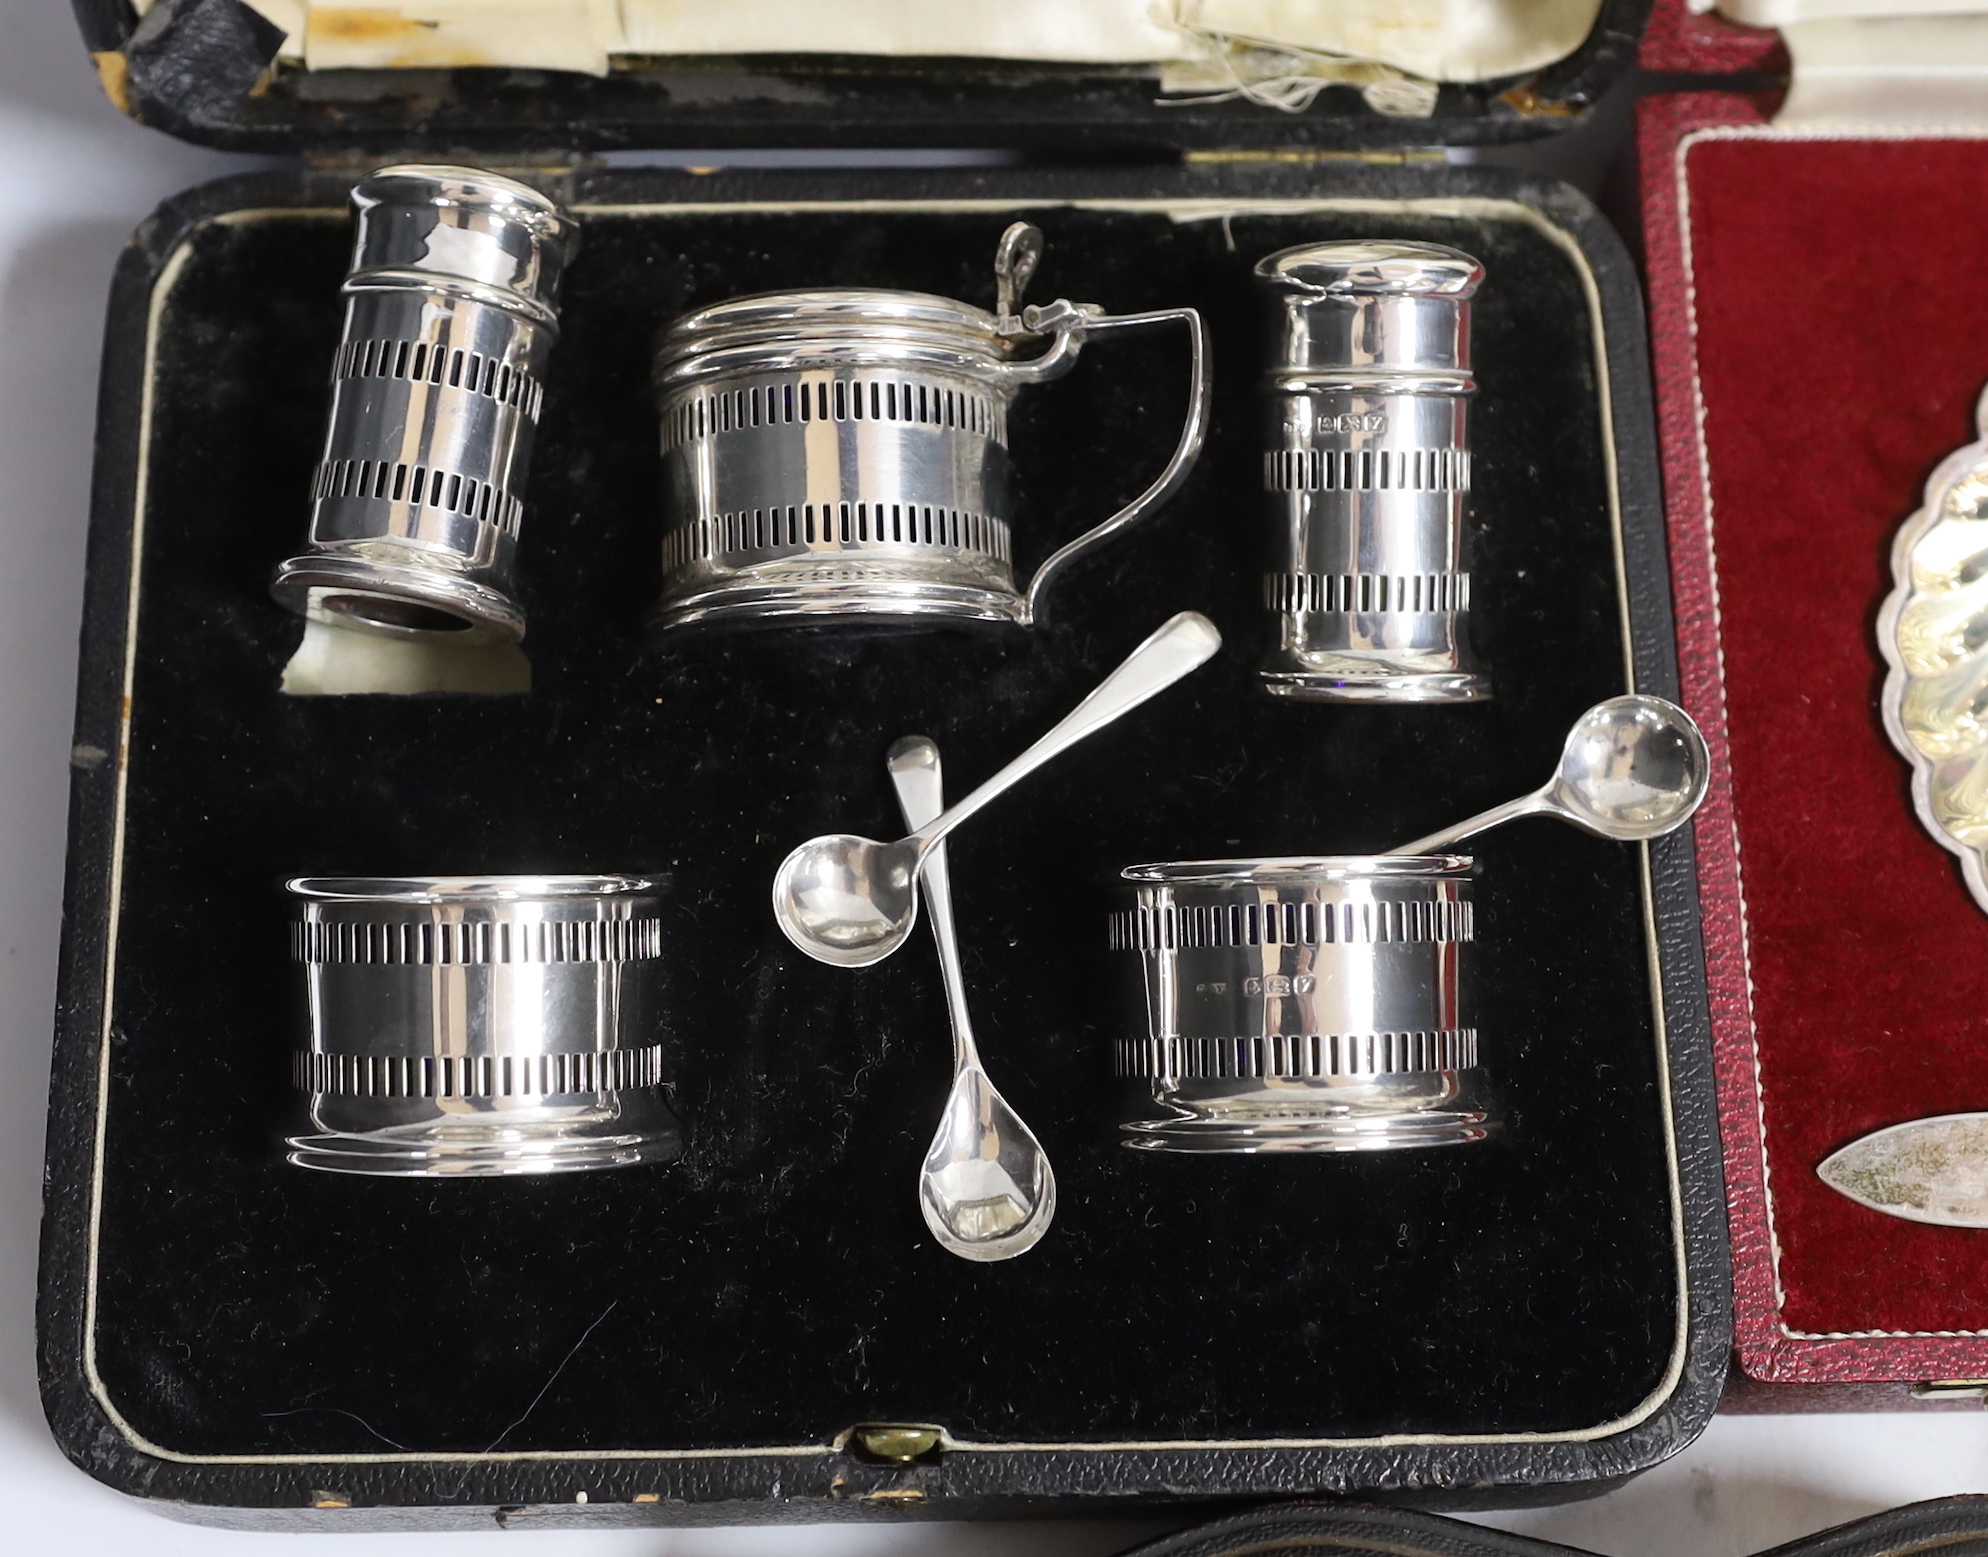 Two modern silver cased shell and butter knife sets, a cased silver five piece condiment set, a cased set of six silver teaspoons with tongs, one other cased silver butter shell and knife and a cased set of plated teaspo